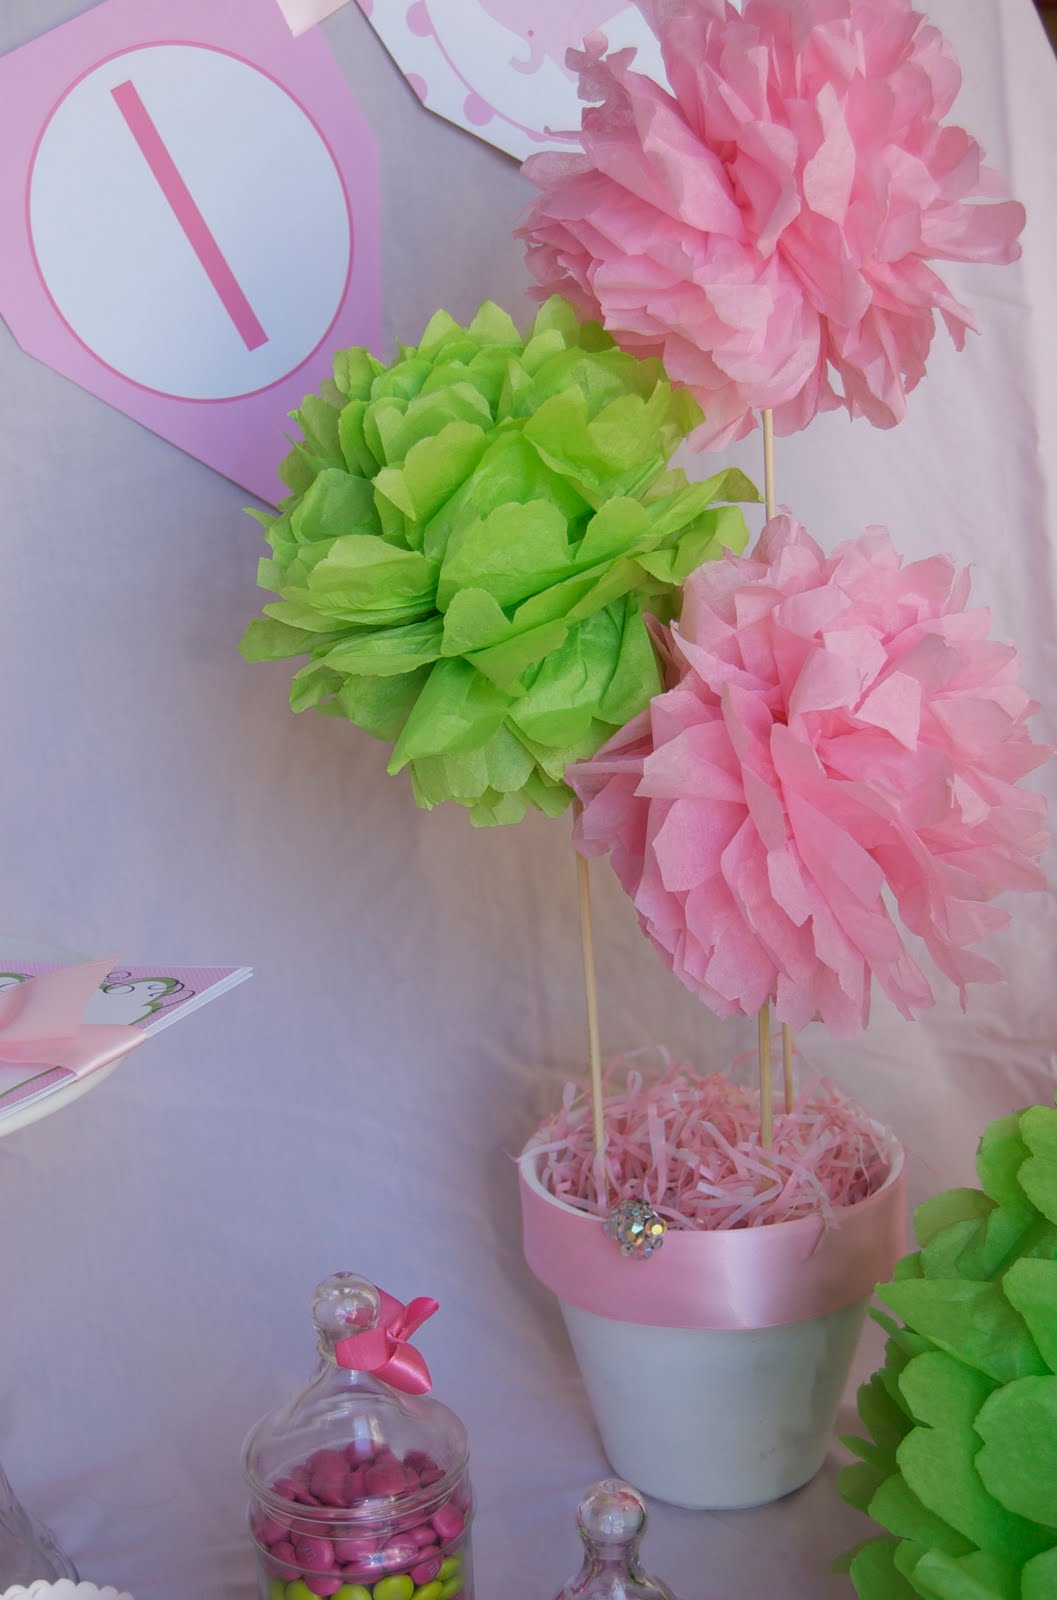 Tissue Ball Pom Pom Arrangement Tutorial and How To- Part 1 - Frog Prince